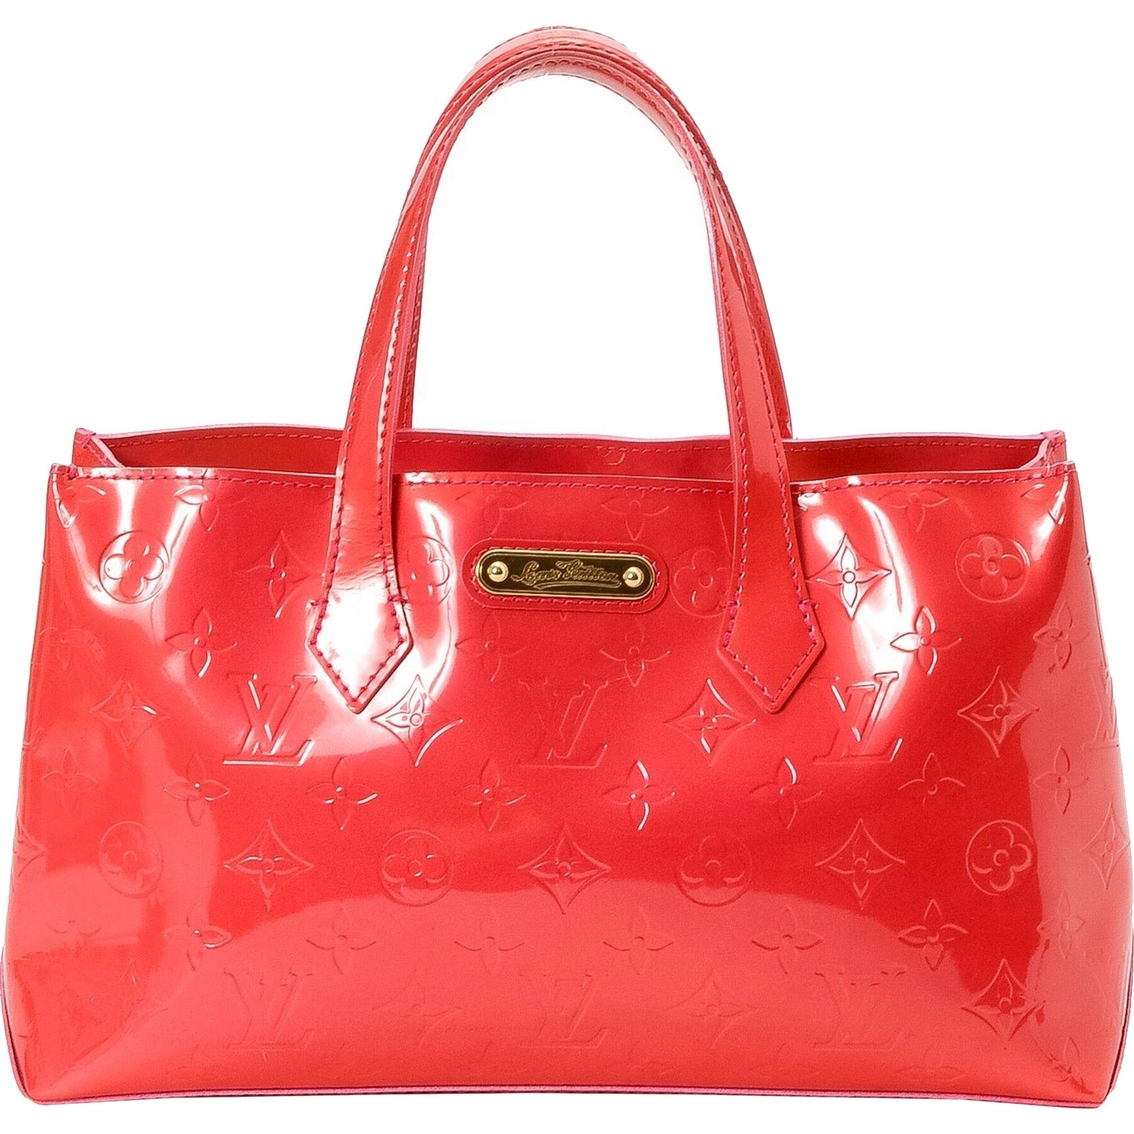 Louis Vuitton Hot Pink Vernis Leather Wilshire Pm Tote Bag (pre-owned ...